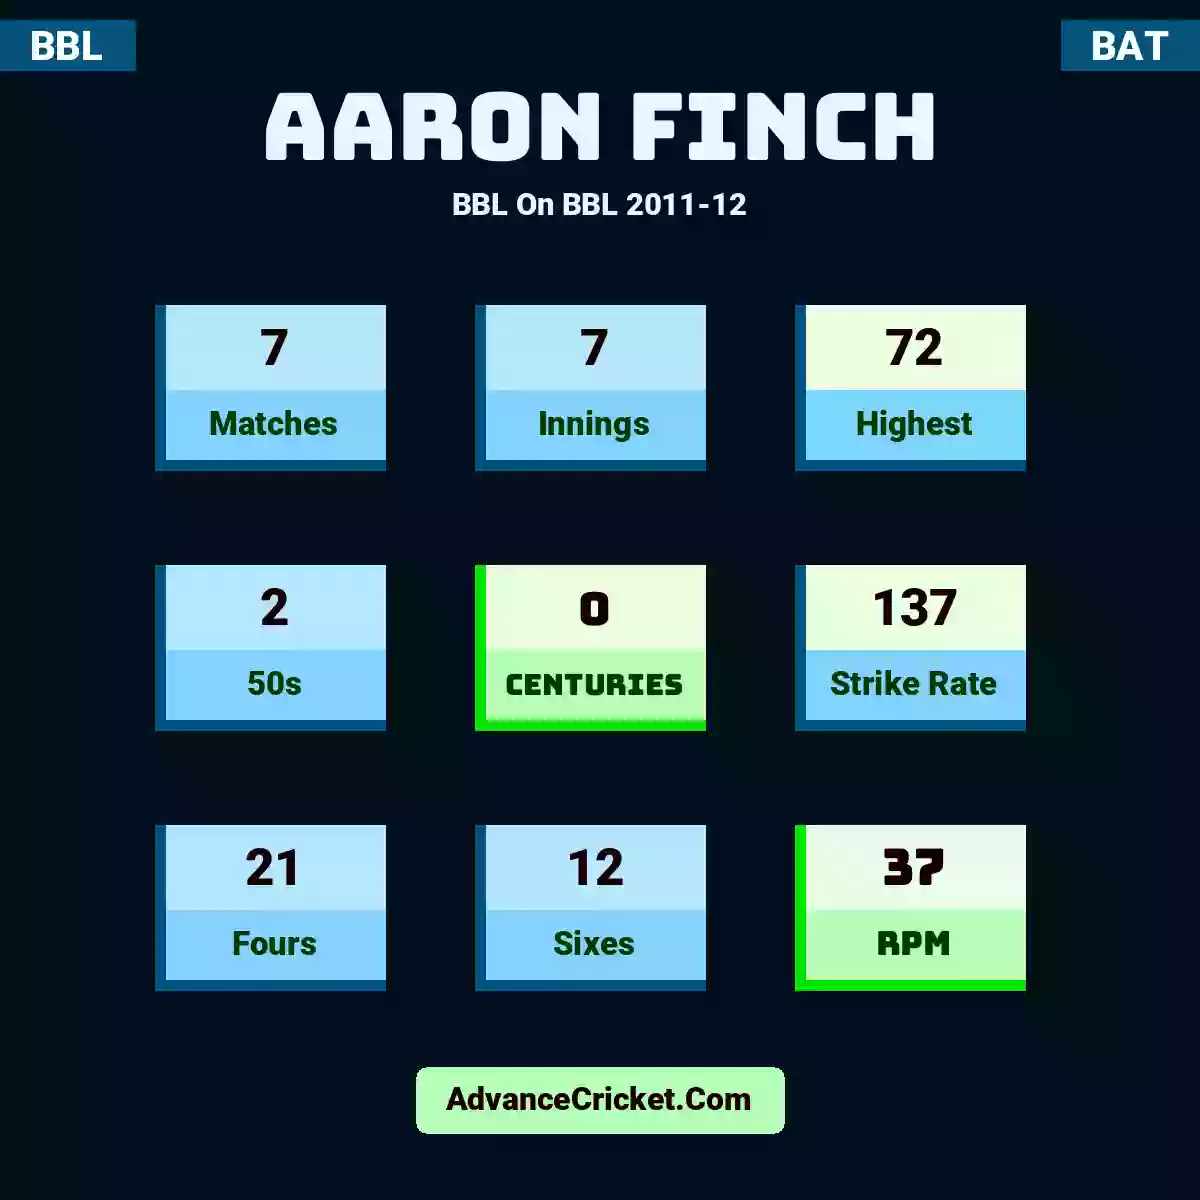 Aaron Finch BBL  On BBL 2011-12, Aaron Finch played 7 matches, scored 72 runs as highest, 2 half-centuries, and 0 centuries, with a strike rate of 137. A.Finch hit 21 fours and 12 sixes, with an RPM of 37.